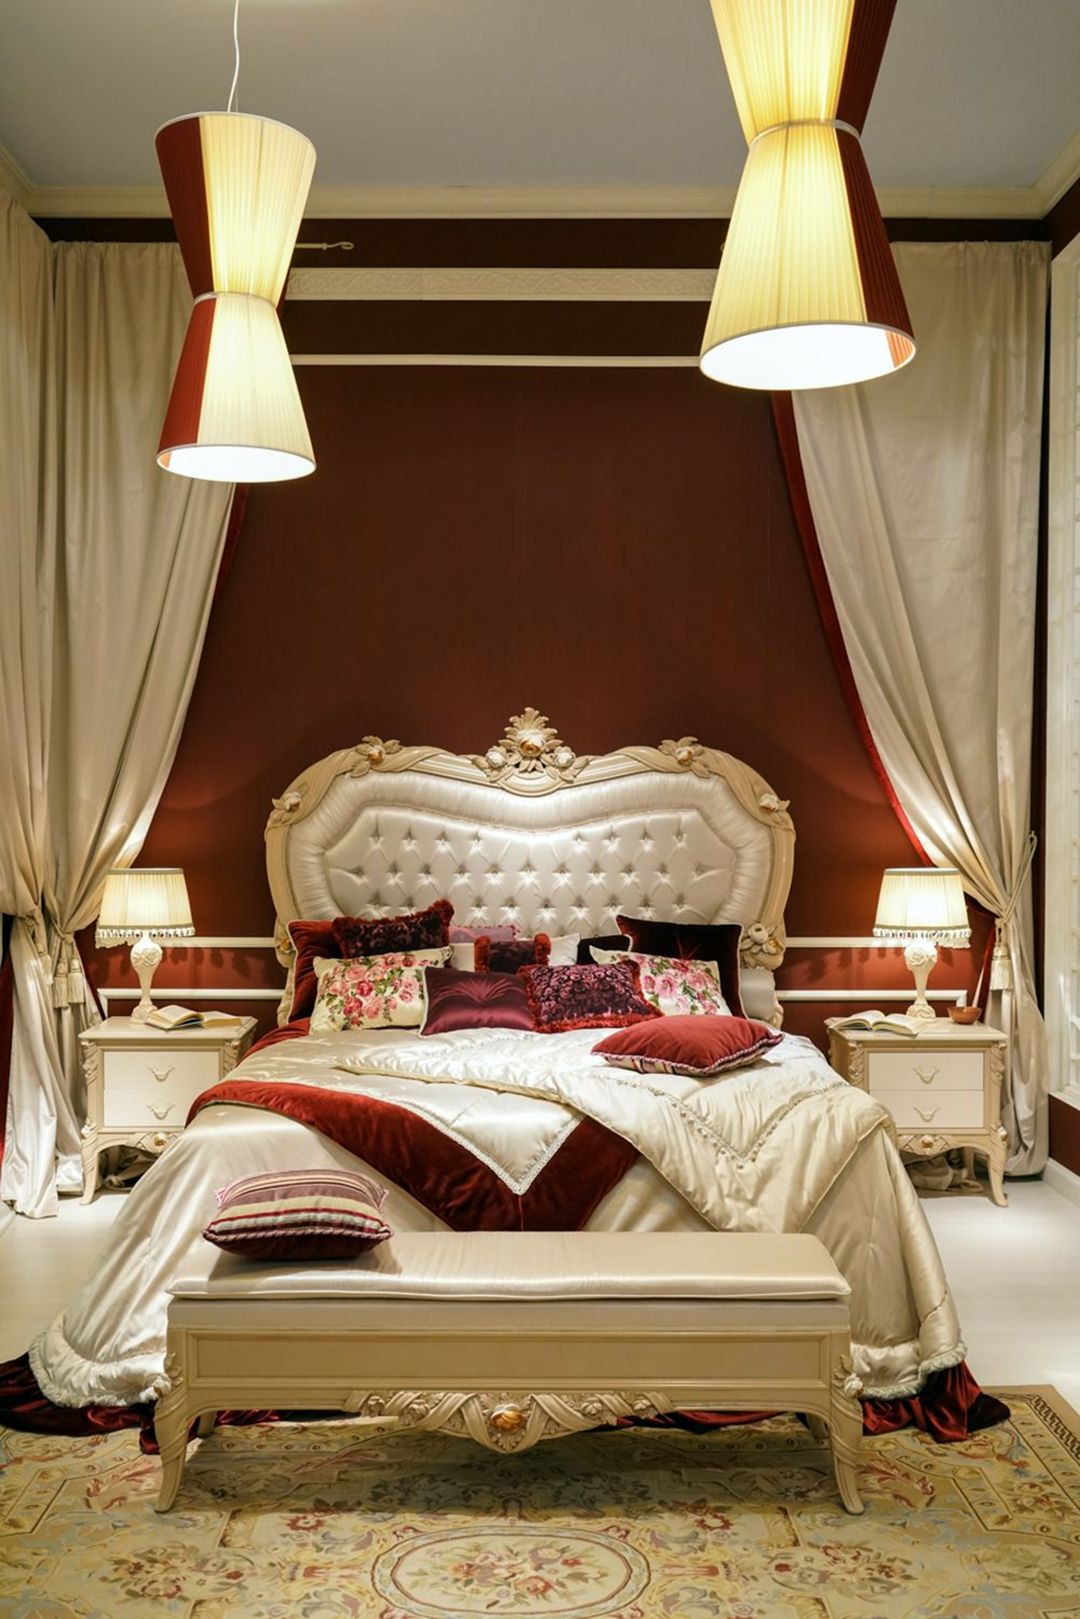 Elegance Bedroom Design With Large Drapes And Red Beddings From Homedit